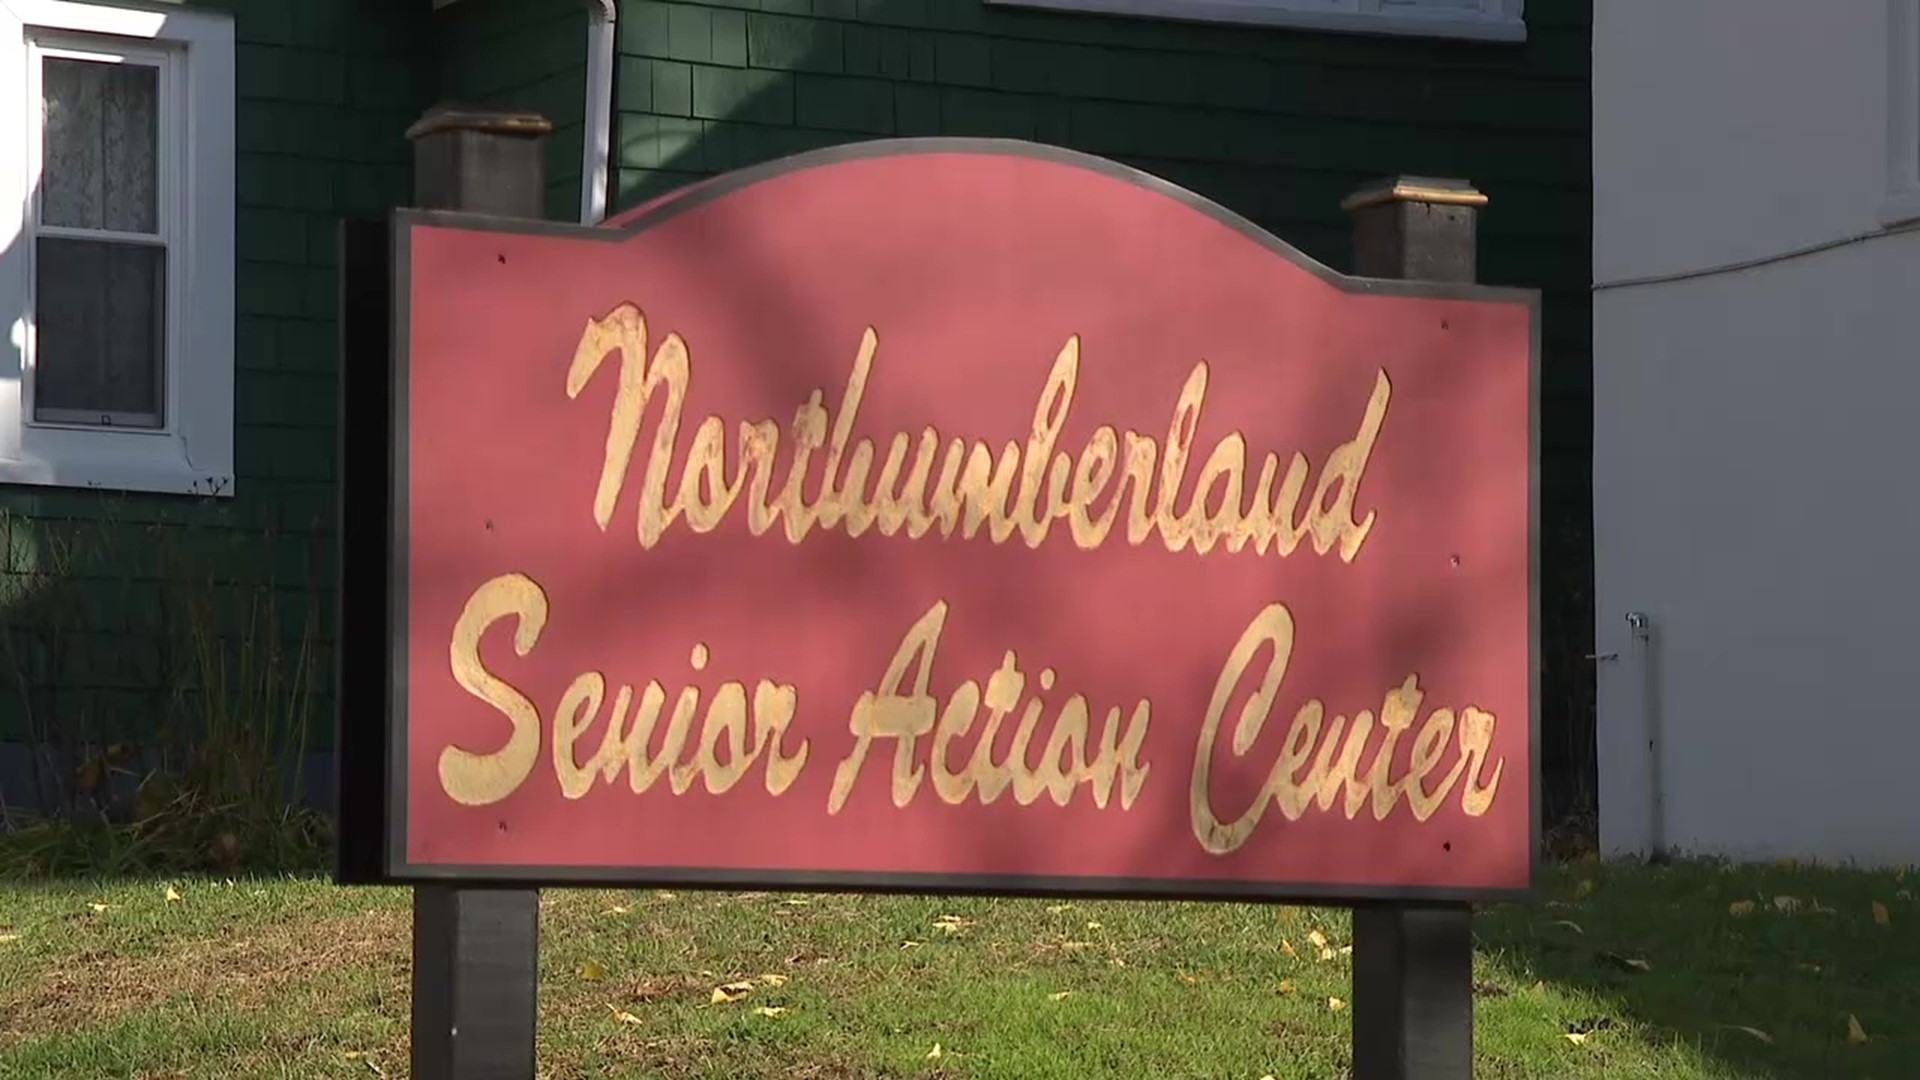 The county's five senior centers will close for two weeks because of the COVID-19 resurgence.